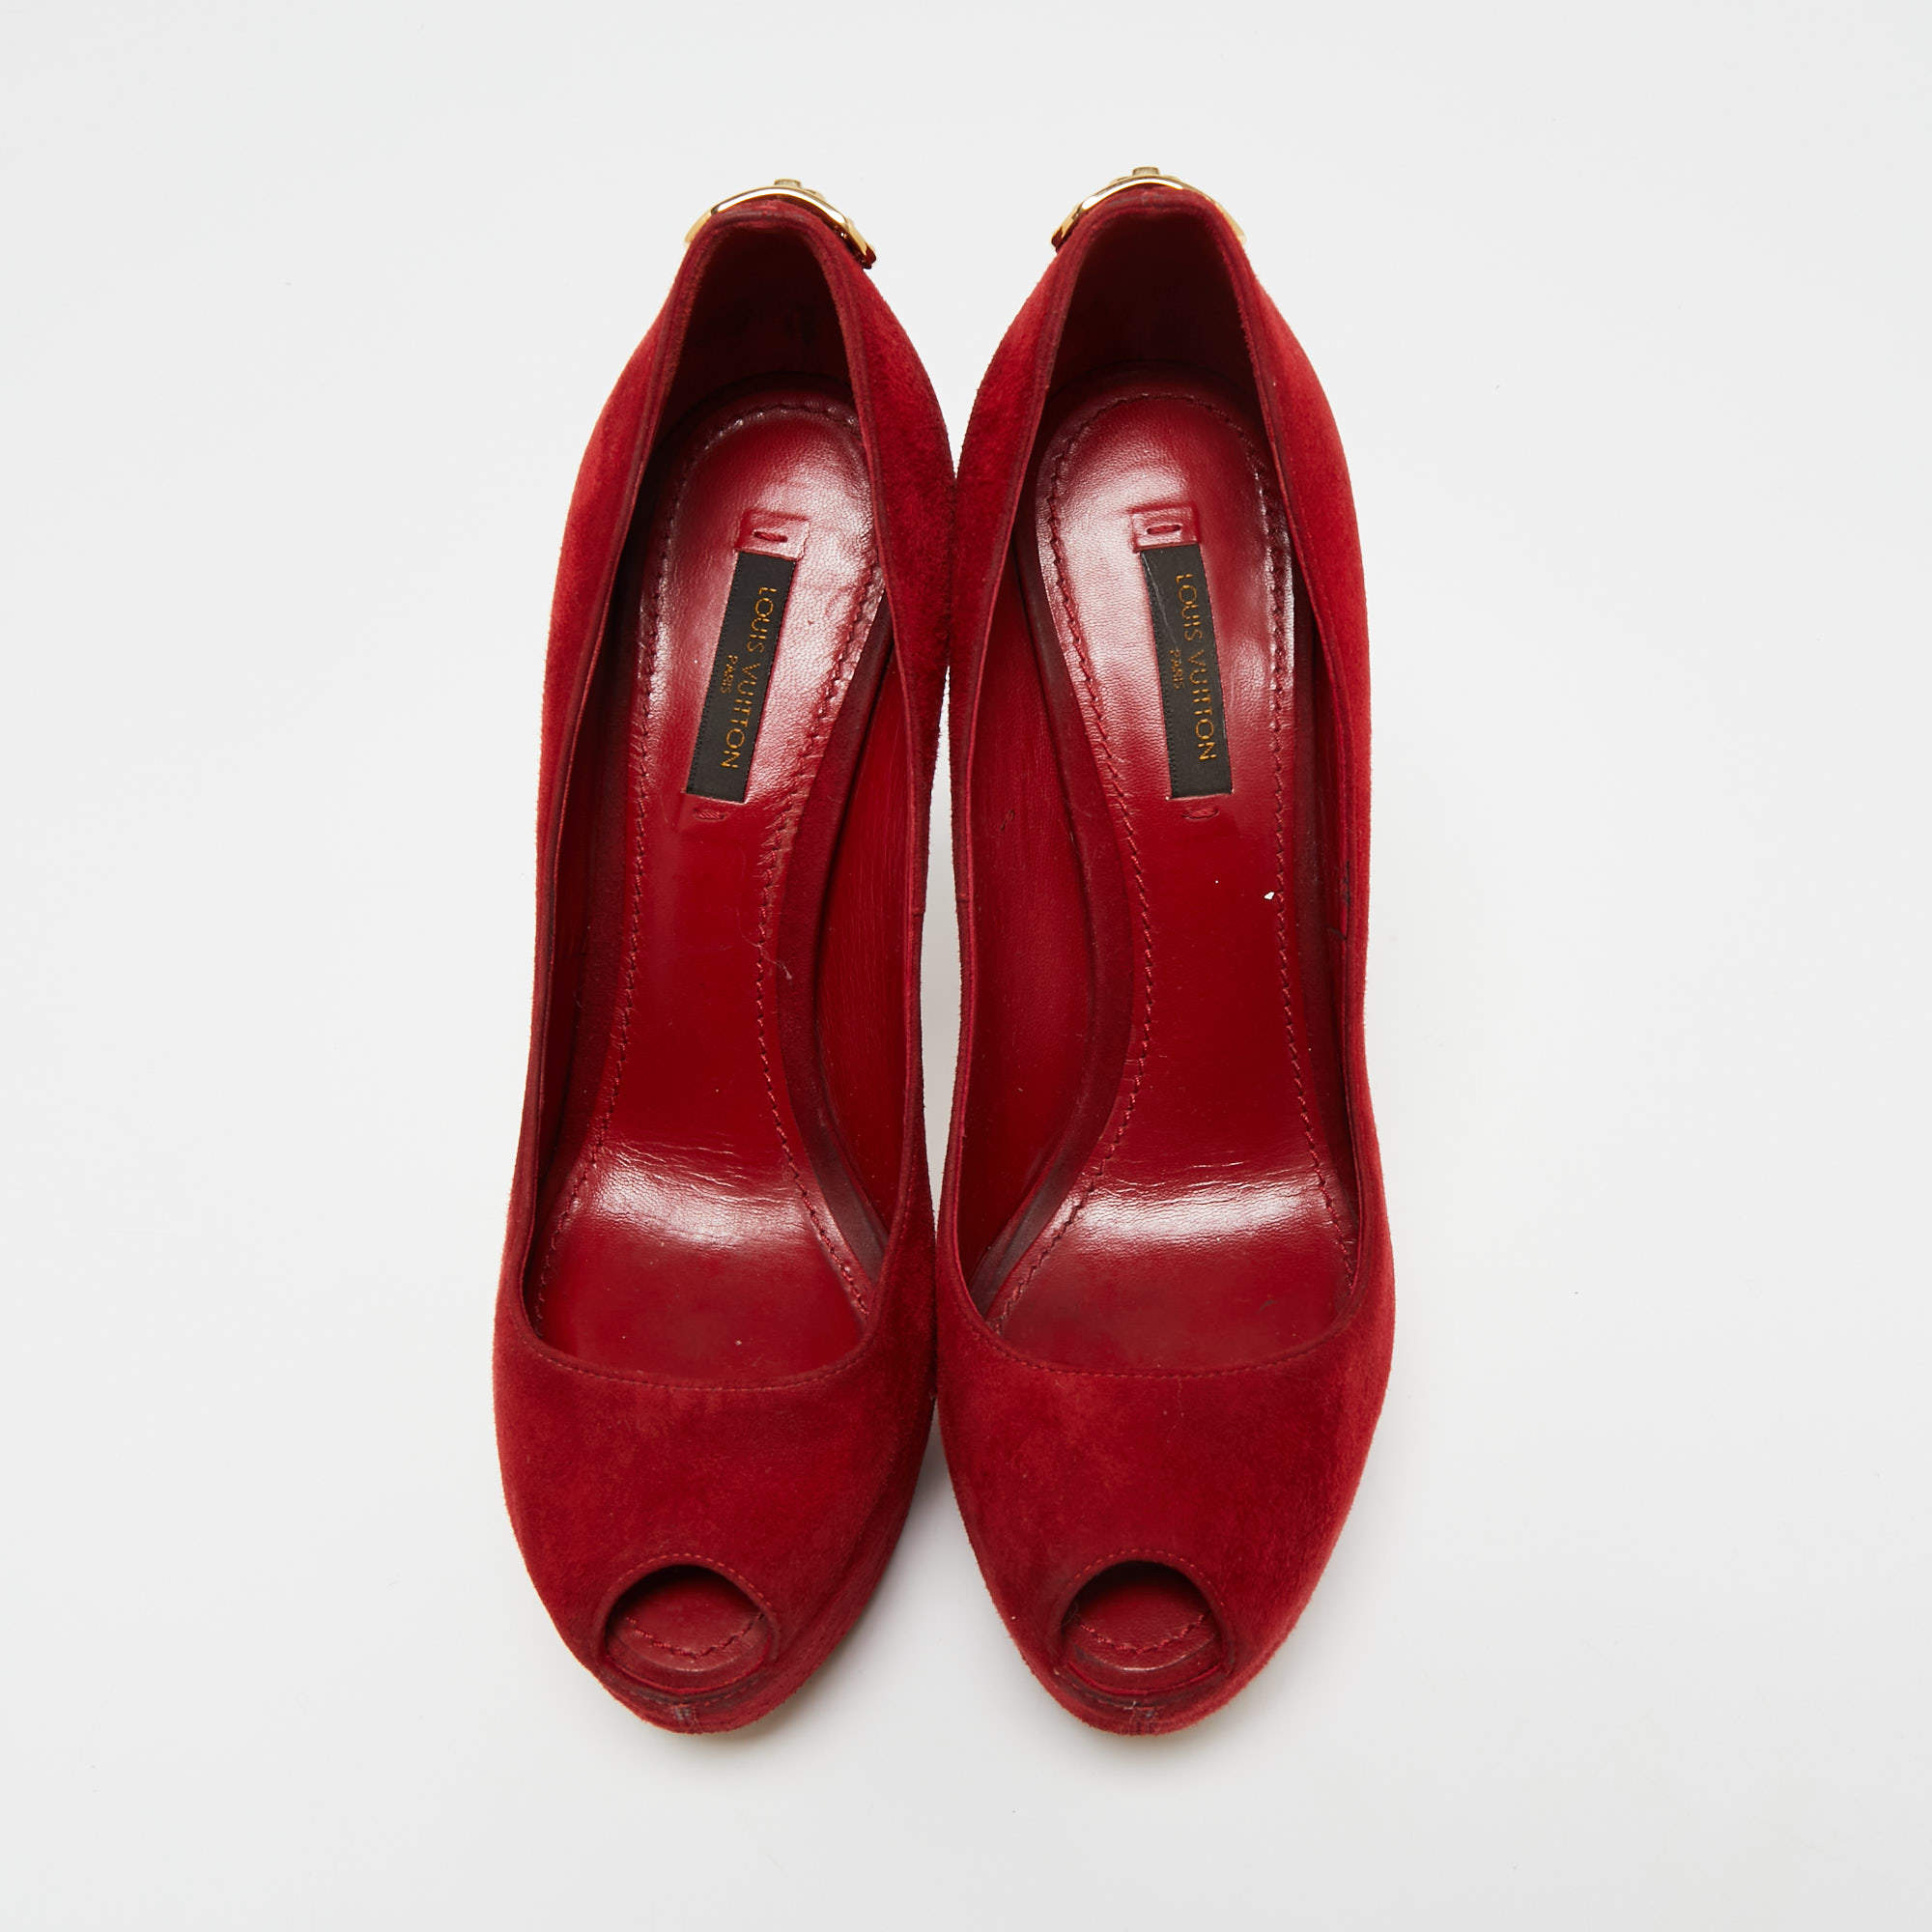 Louis Vuitton Red Suede Leather Pumps Shoes Size 37 – Italy Station